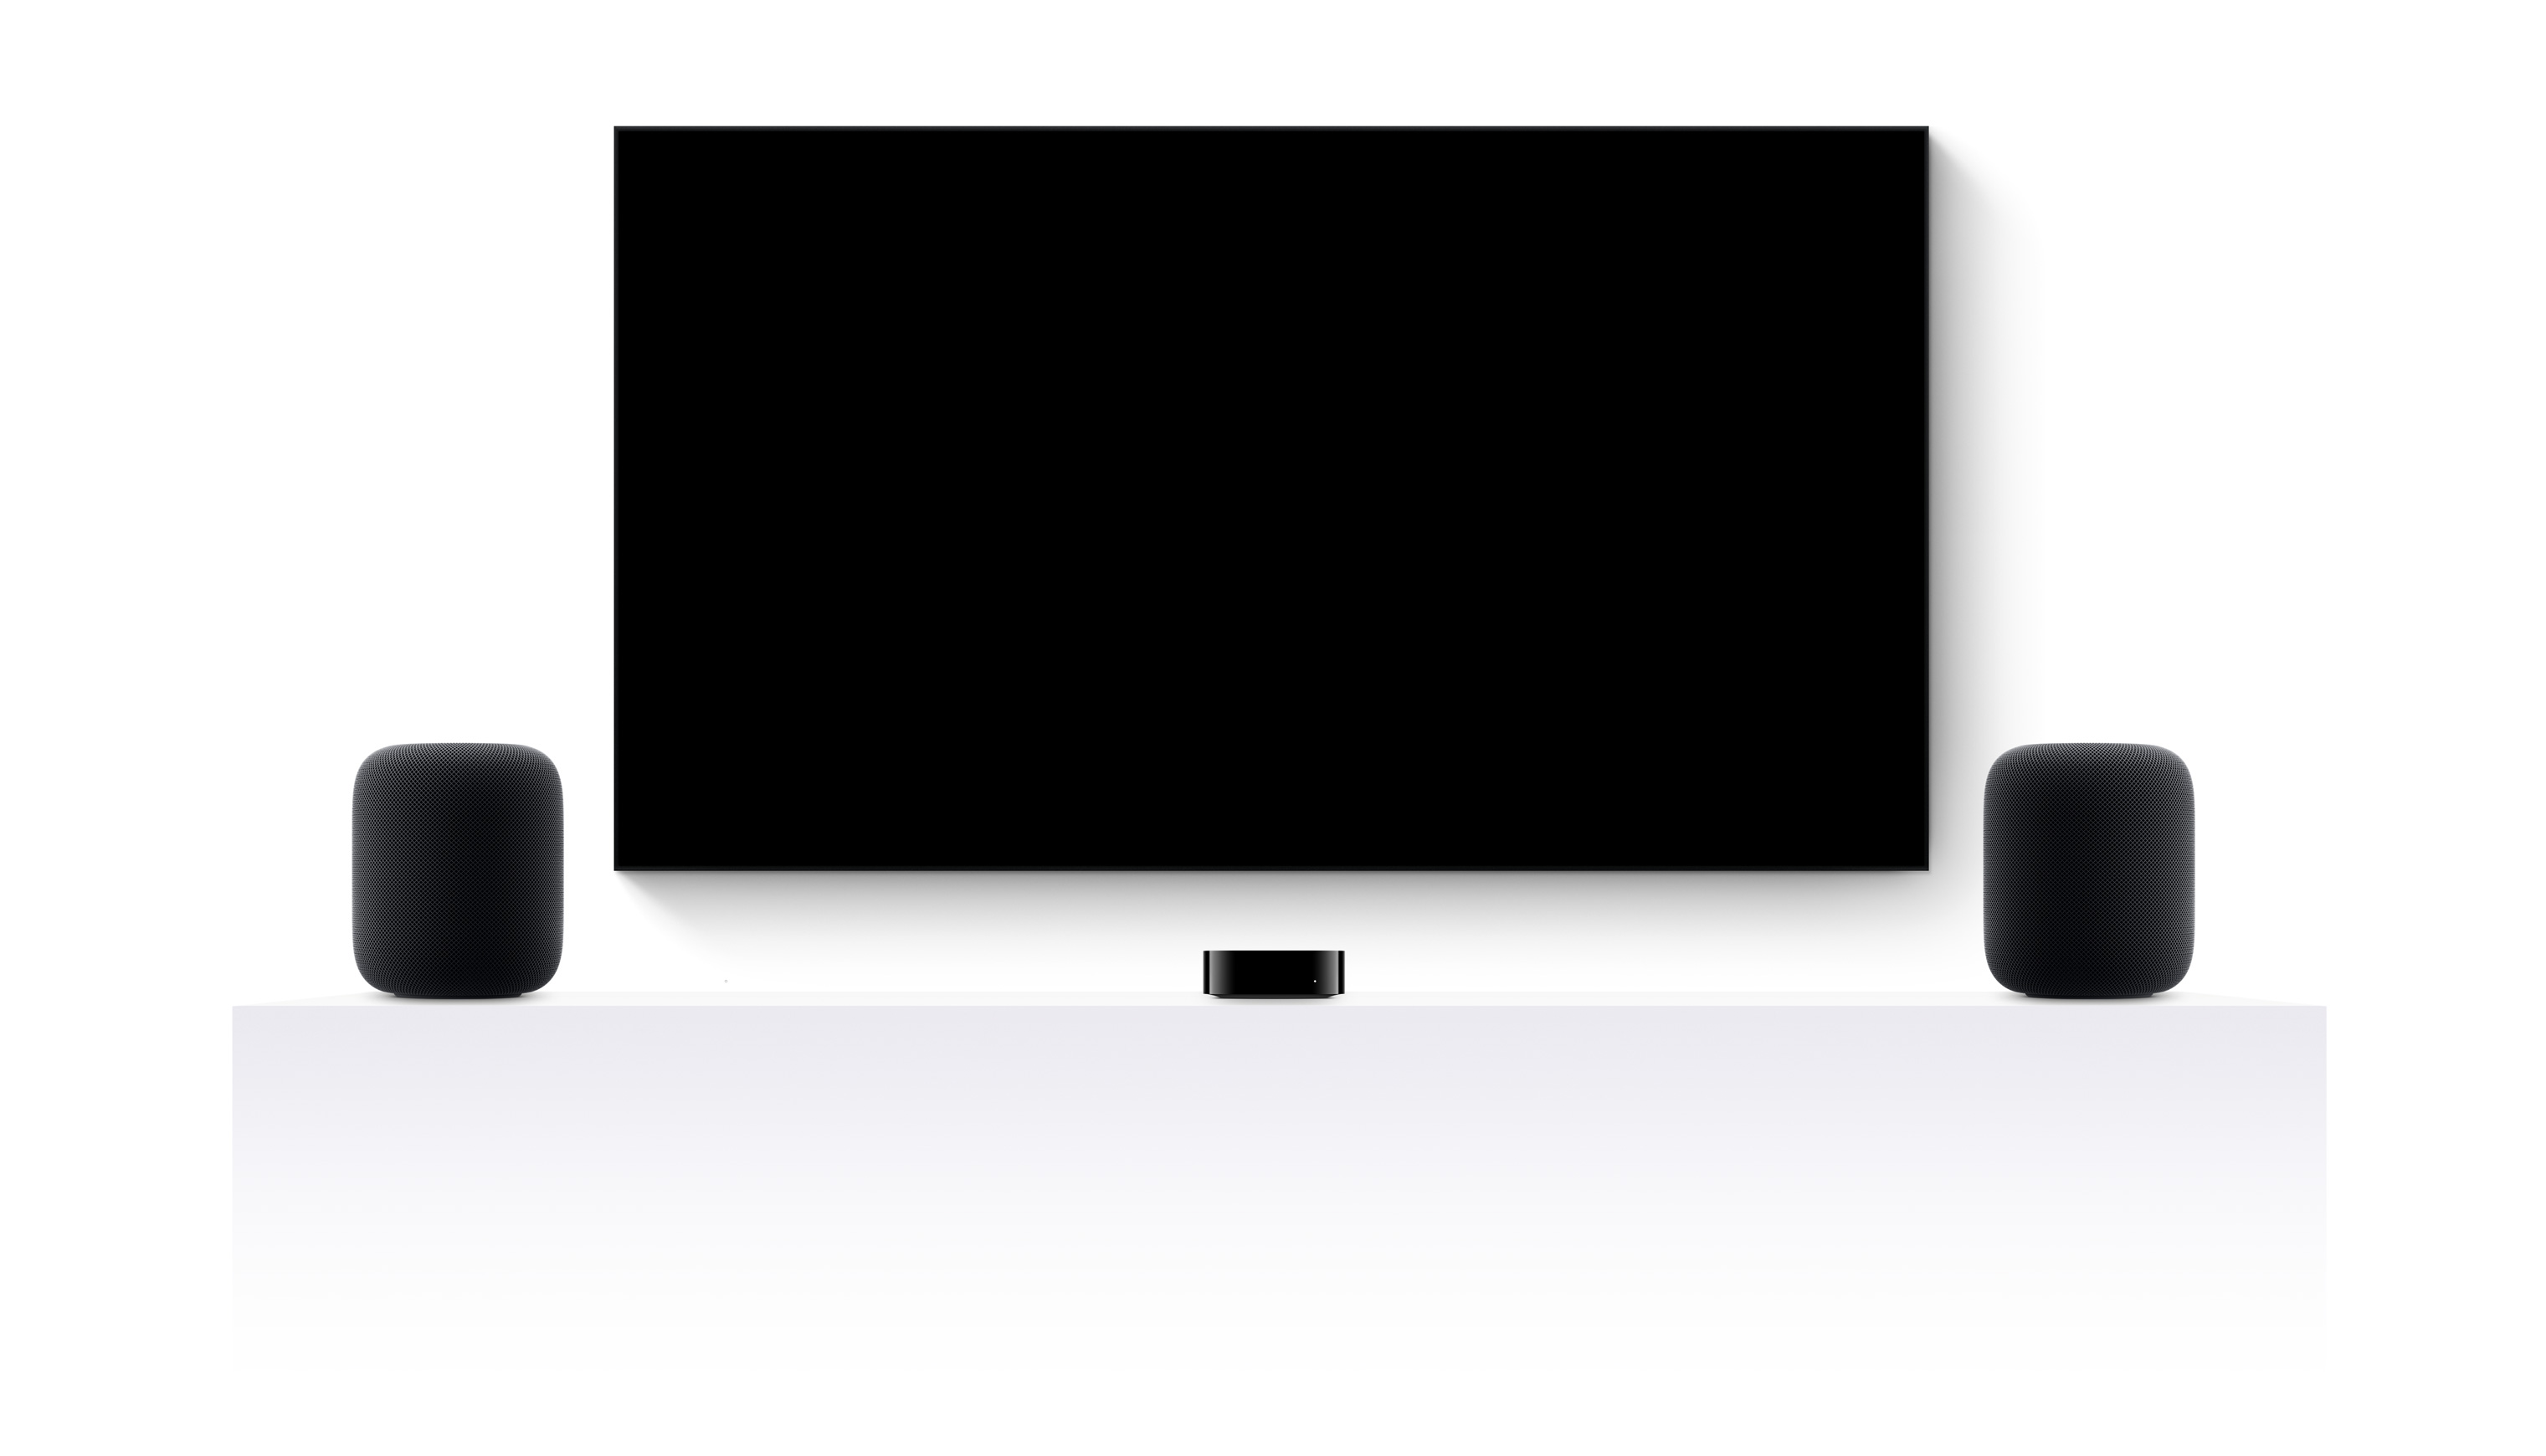 Apple TV 4k, two HomePods and a flat-screen television showing an edited trailer of various Apple TV+ movies and shows